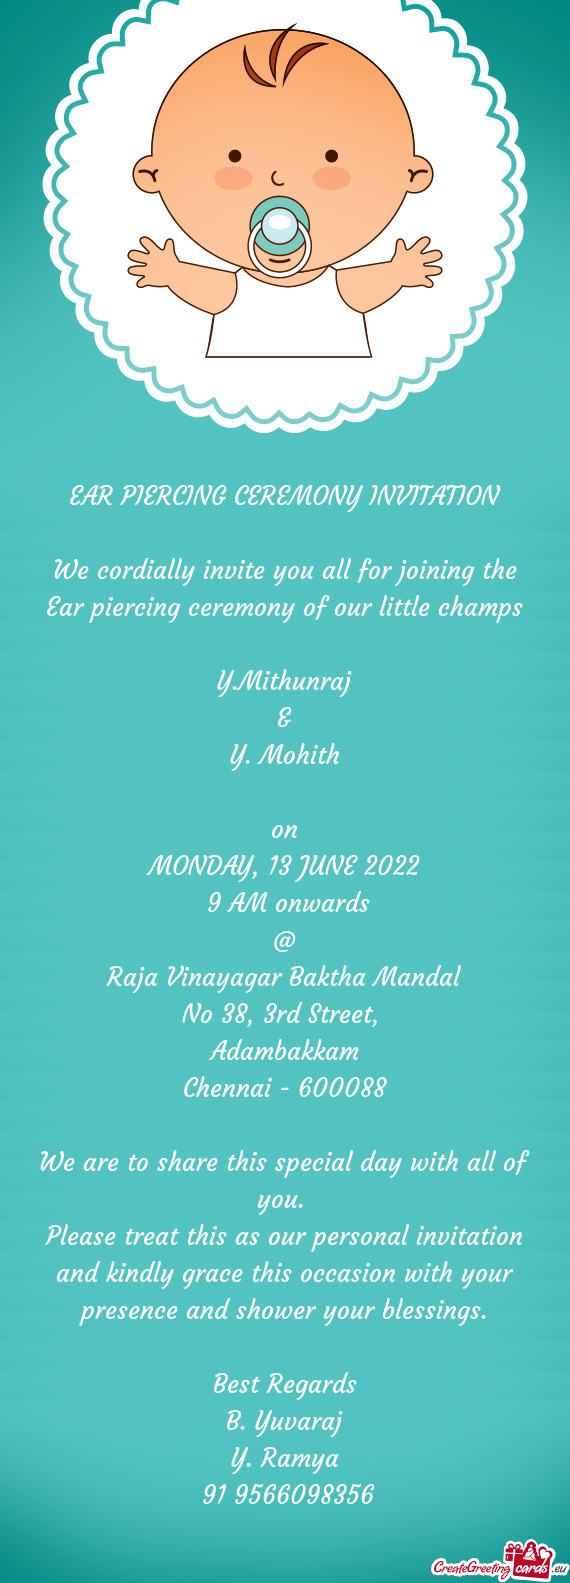 We cordially invite you all for joining the Ear piercing ceremony of our little champs